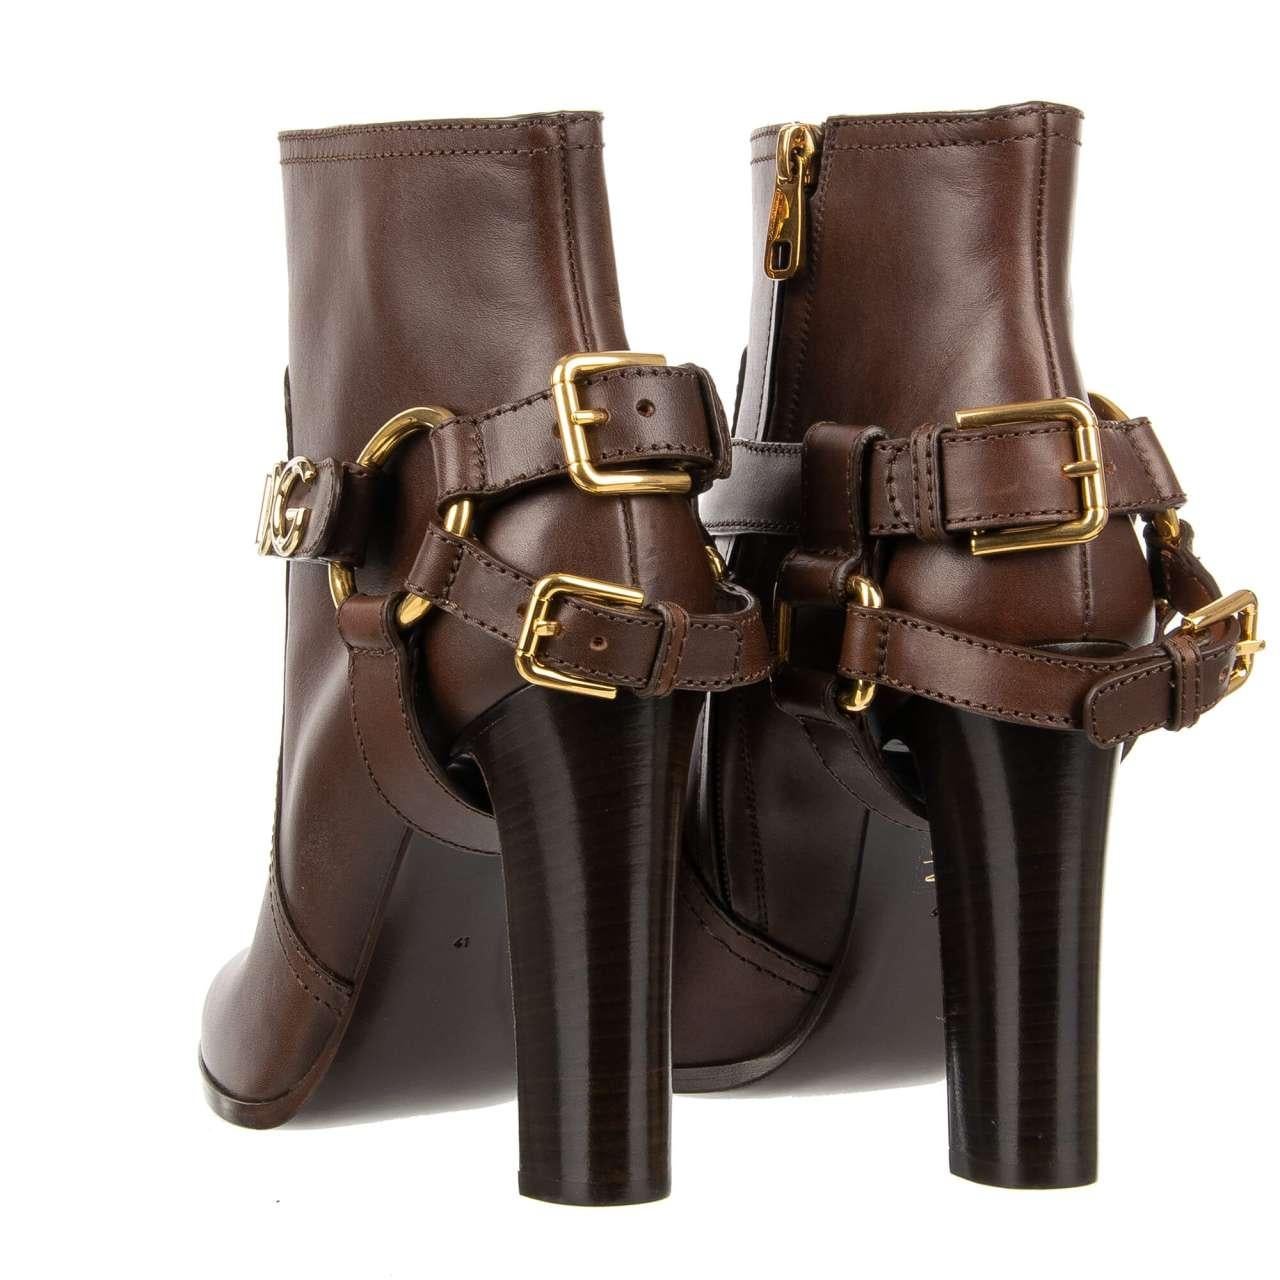 - Leather Boots CAROLINE with metal DG Logo and straps in brown by DOLCE & GABBANA - MADE IN ITALY - New with Box - Model: CT0698-AW673-80048 - Material: 100% Calf leather - Sole: Leather - Color: Brown - DG Golden metal logo - Zip Closure - Heel: